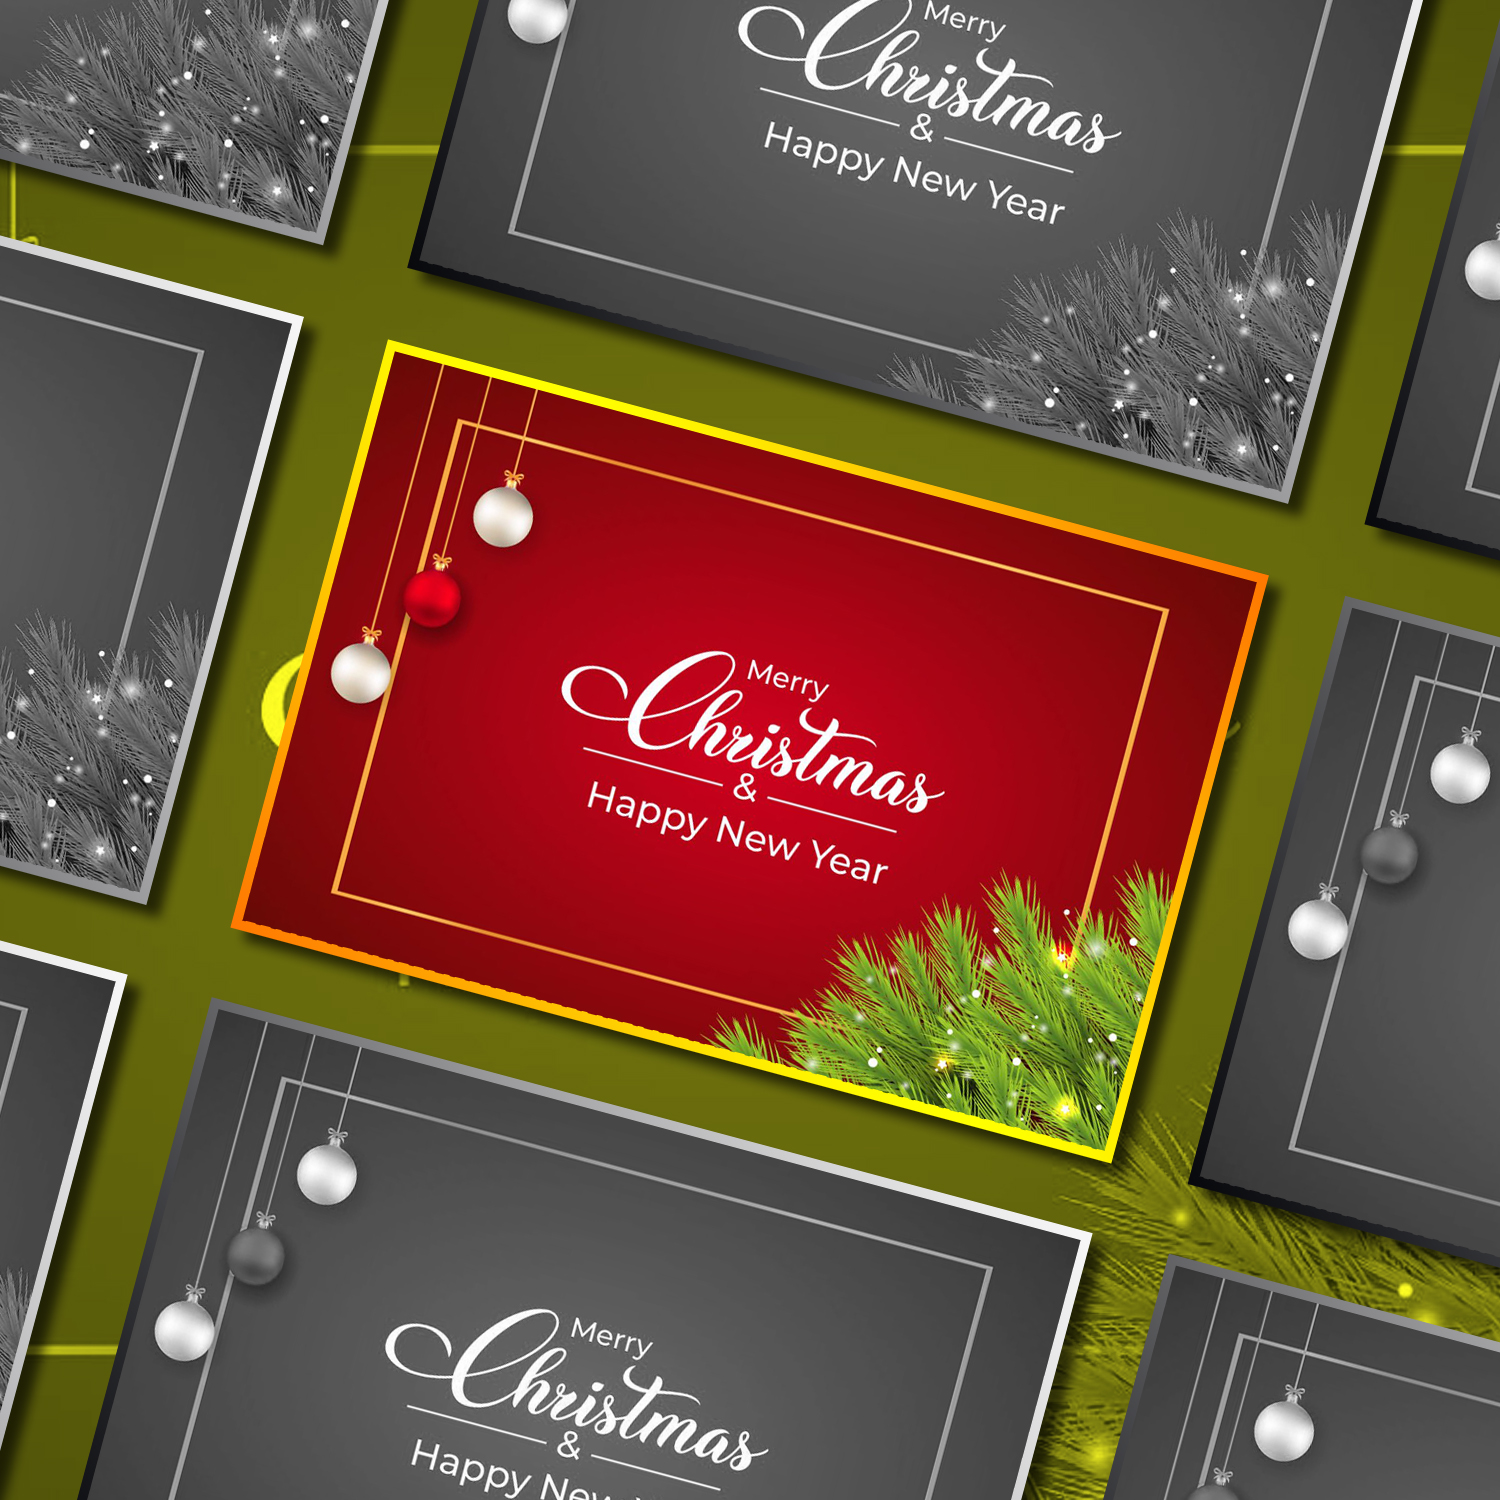 Christmas Banner with Red Background cover.